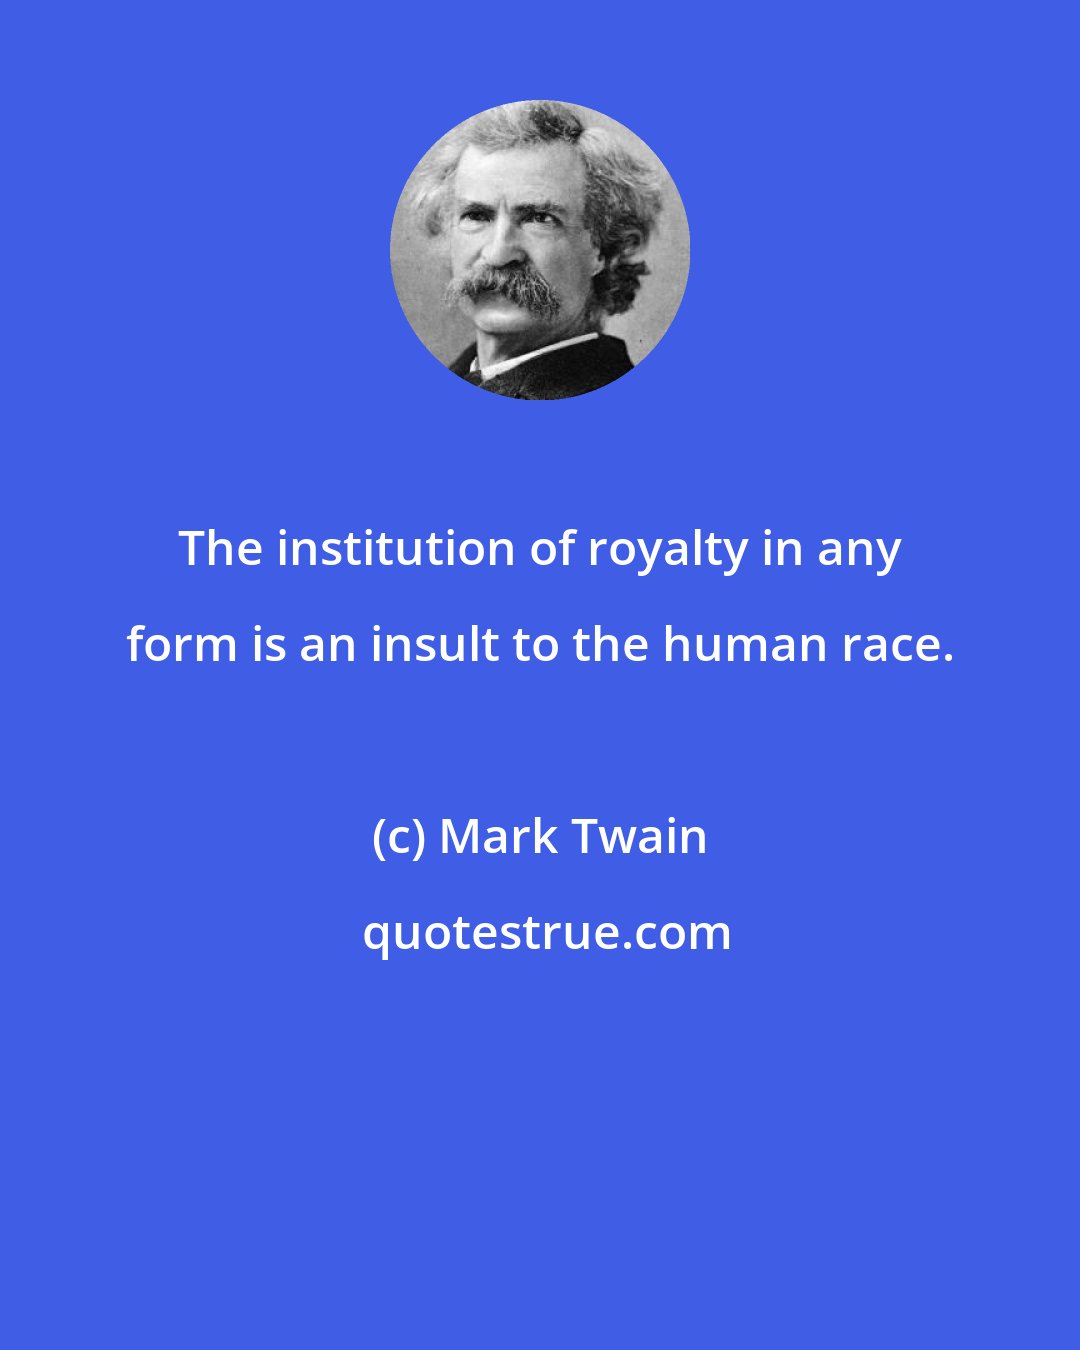 Mark Twain: The institution of royalty in any form is an insult to the human race.